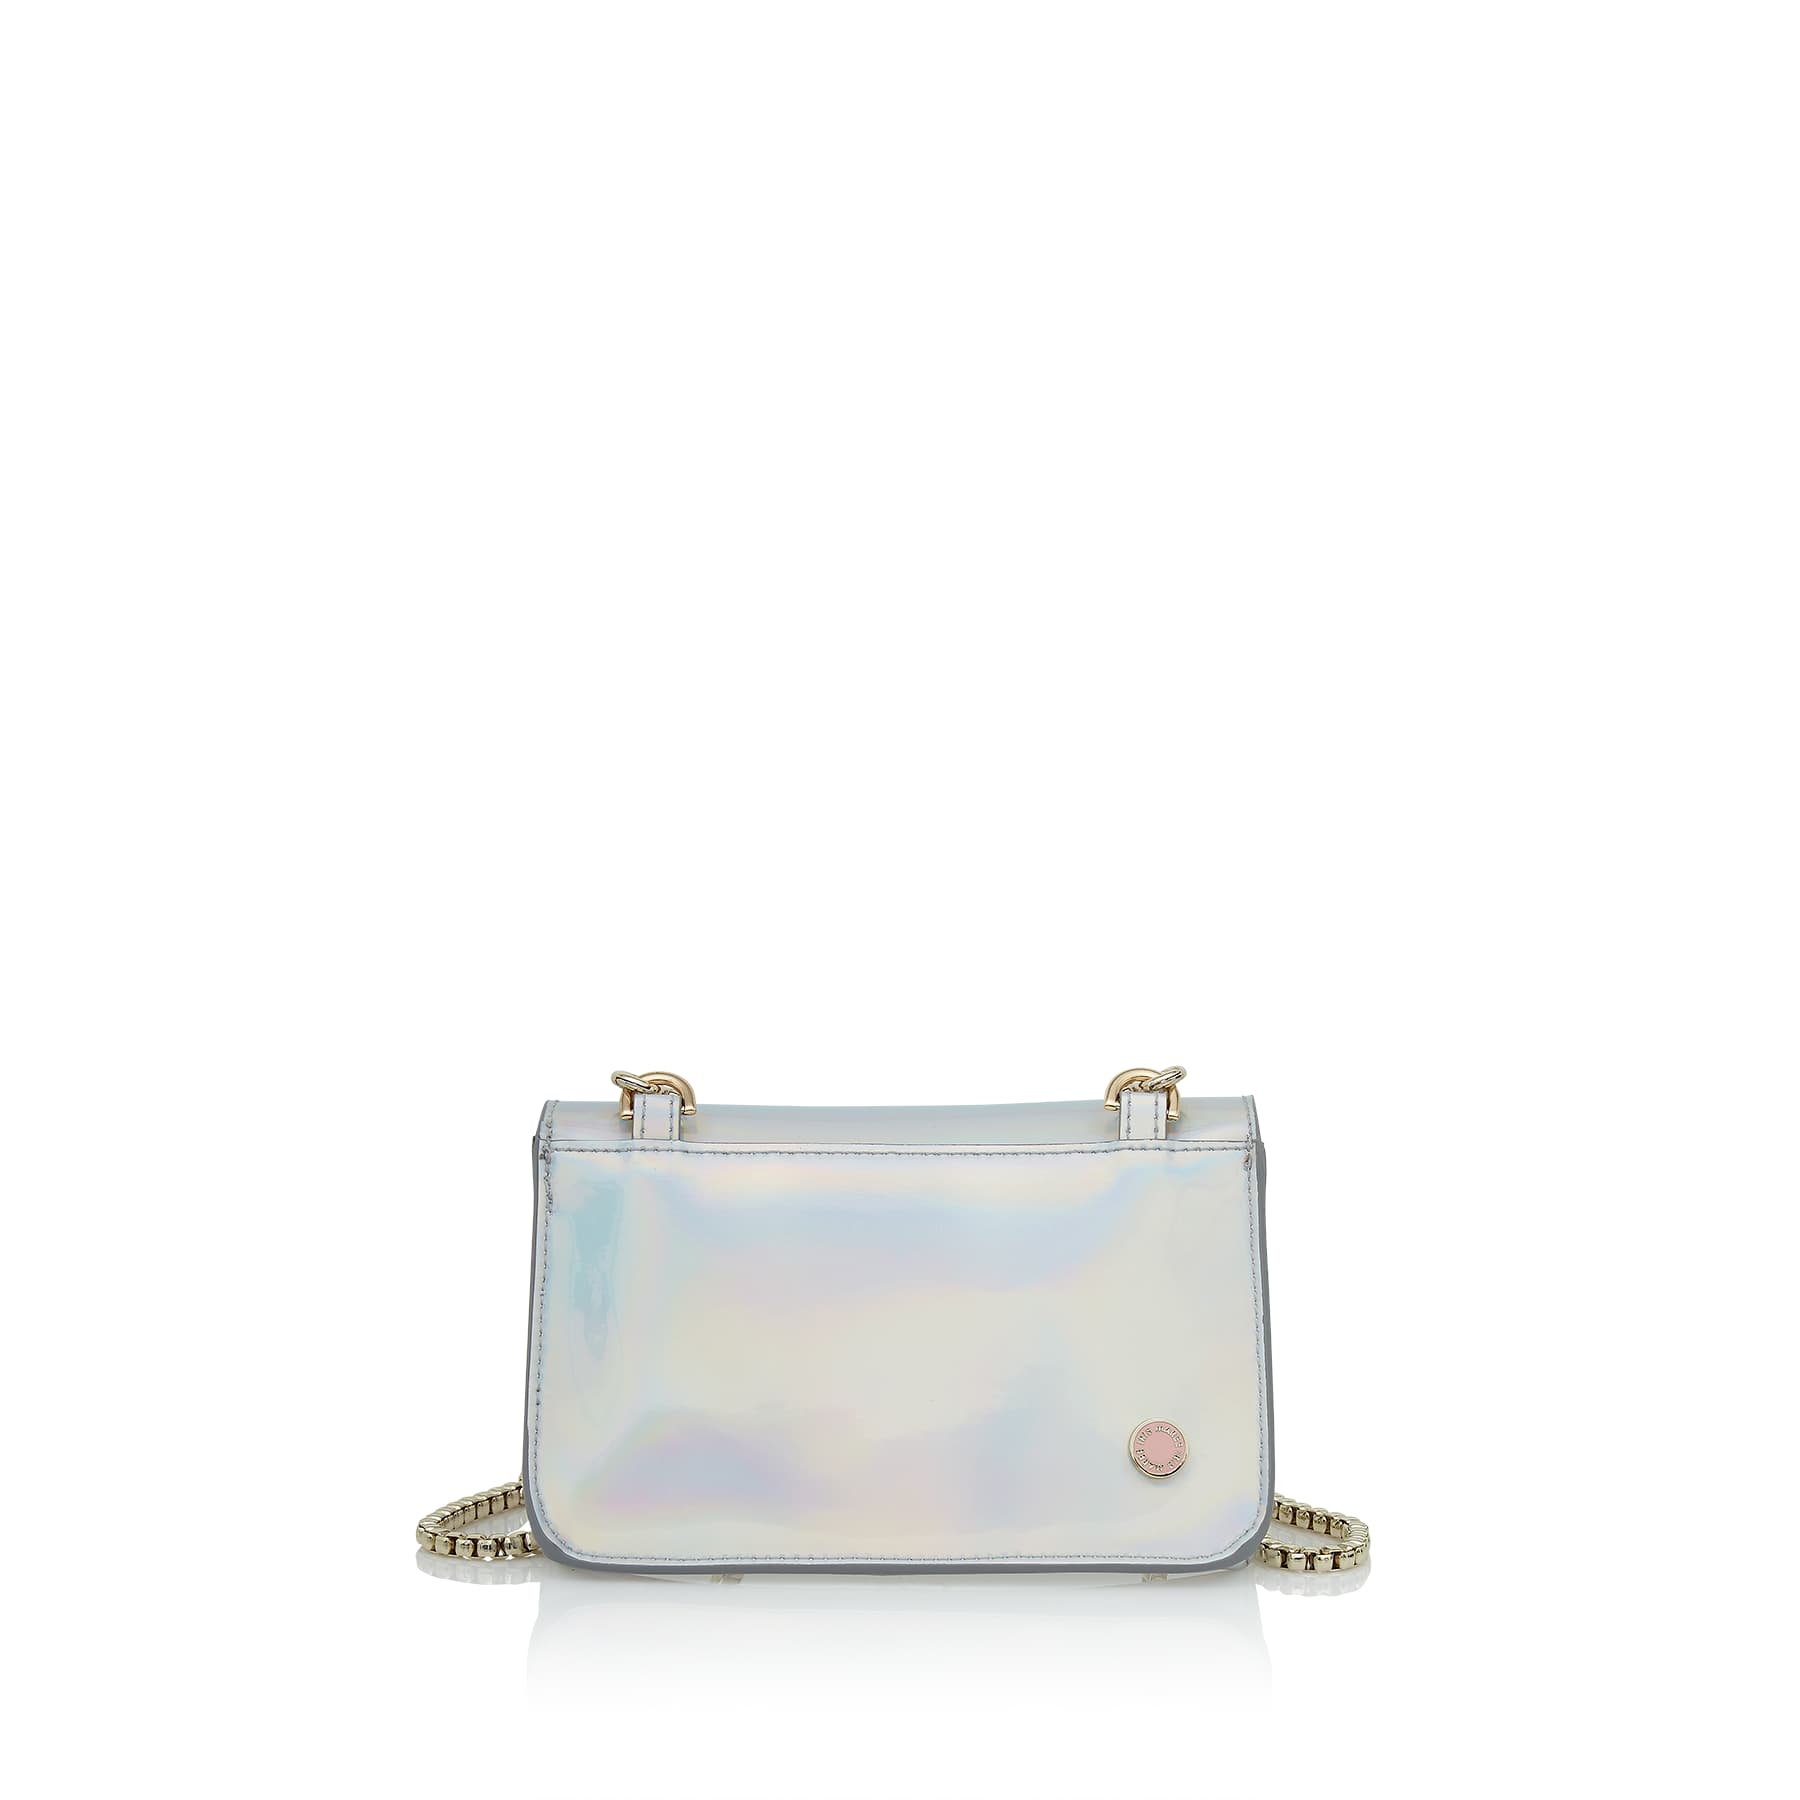 Julian Dew Metallic cross-body bag with gold strap and back zip pocket with gold zipper and the Iris Maree pink and white logo